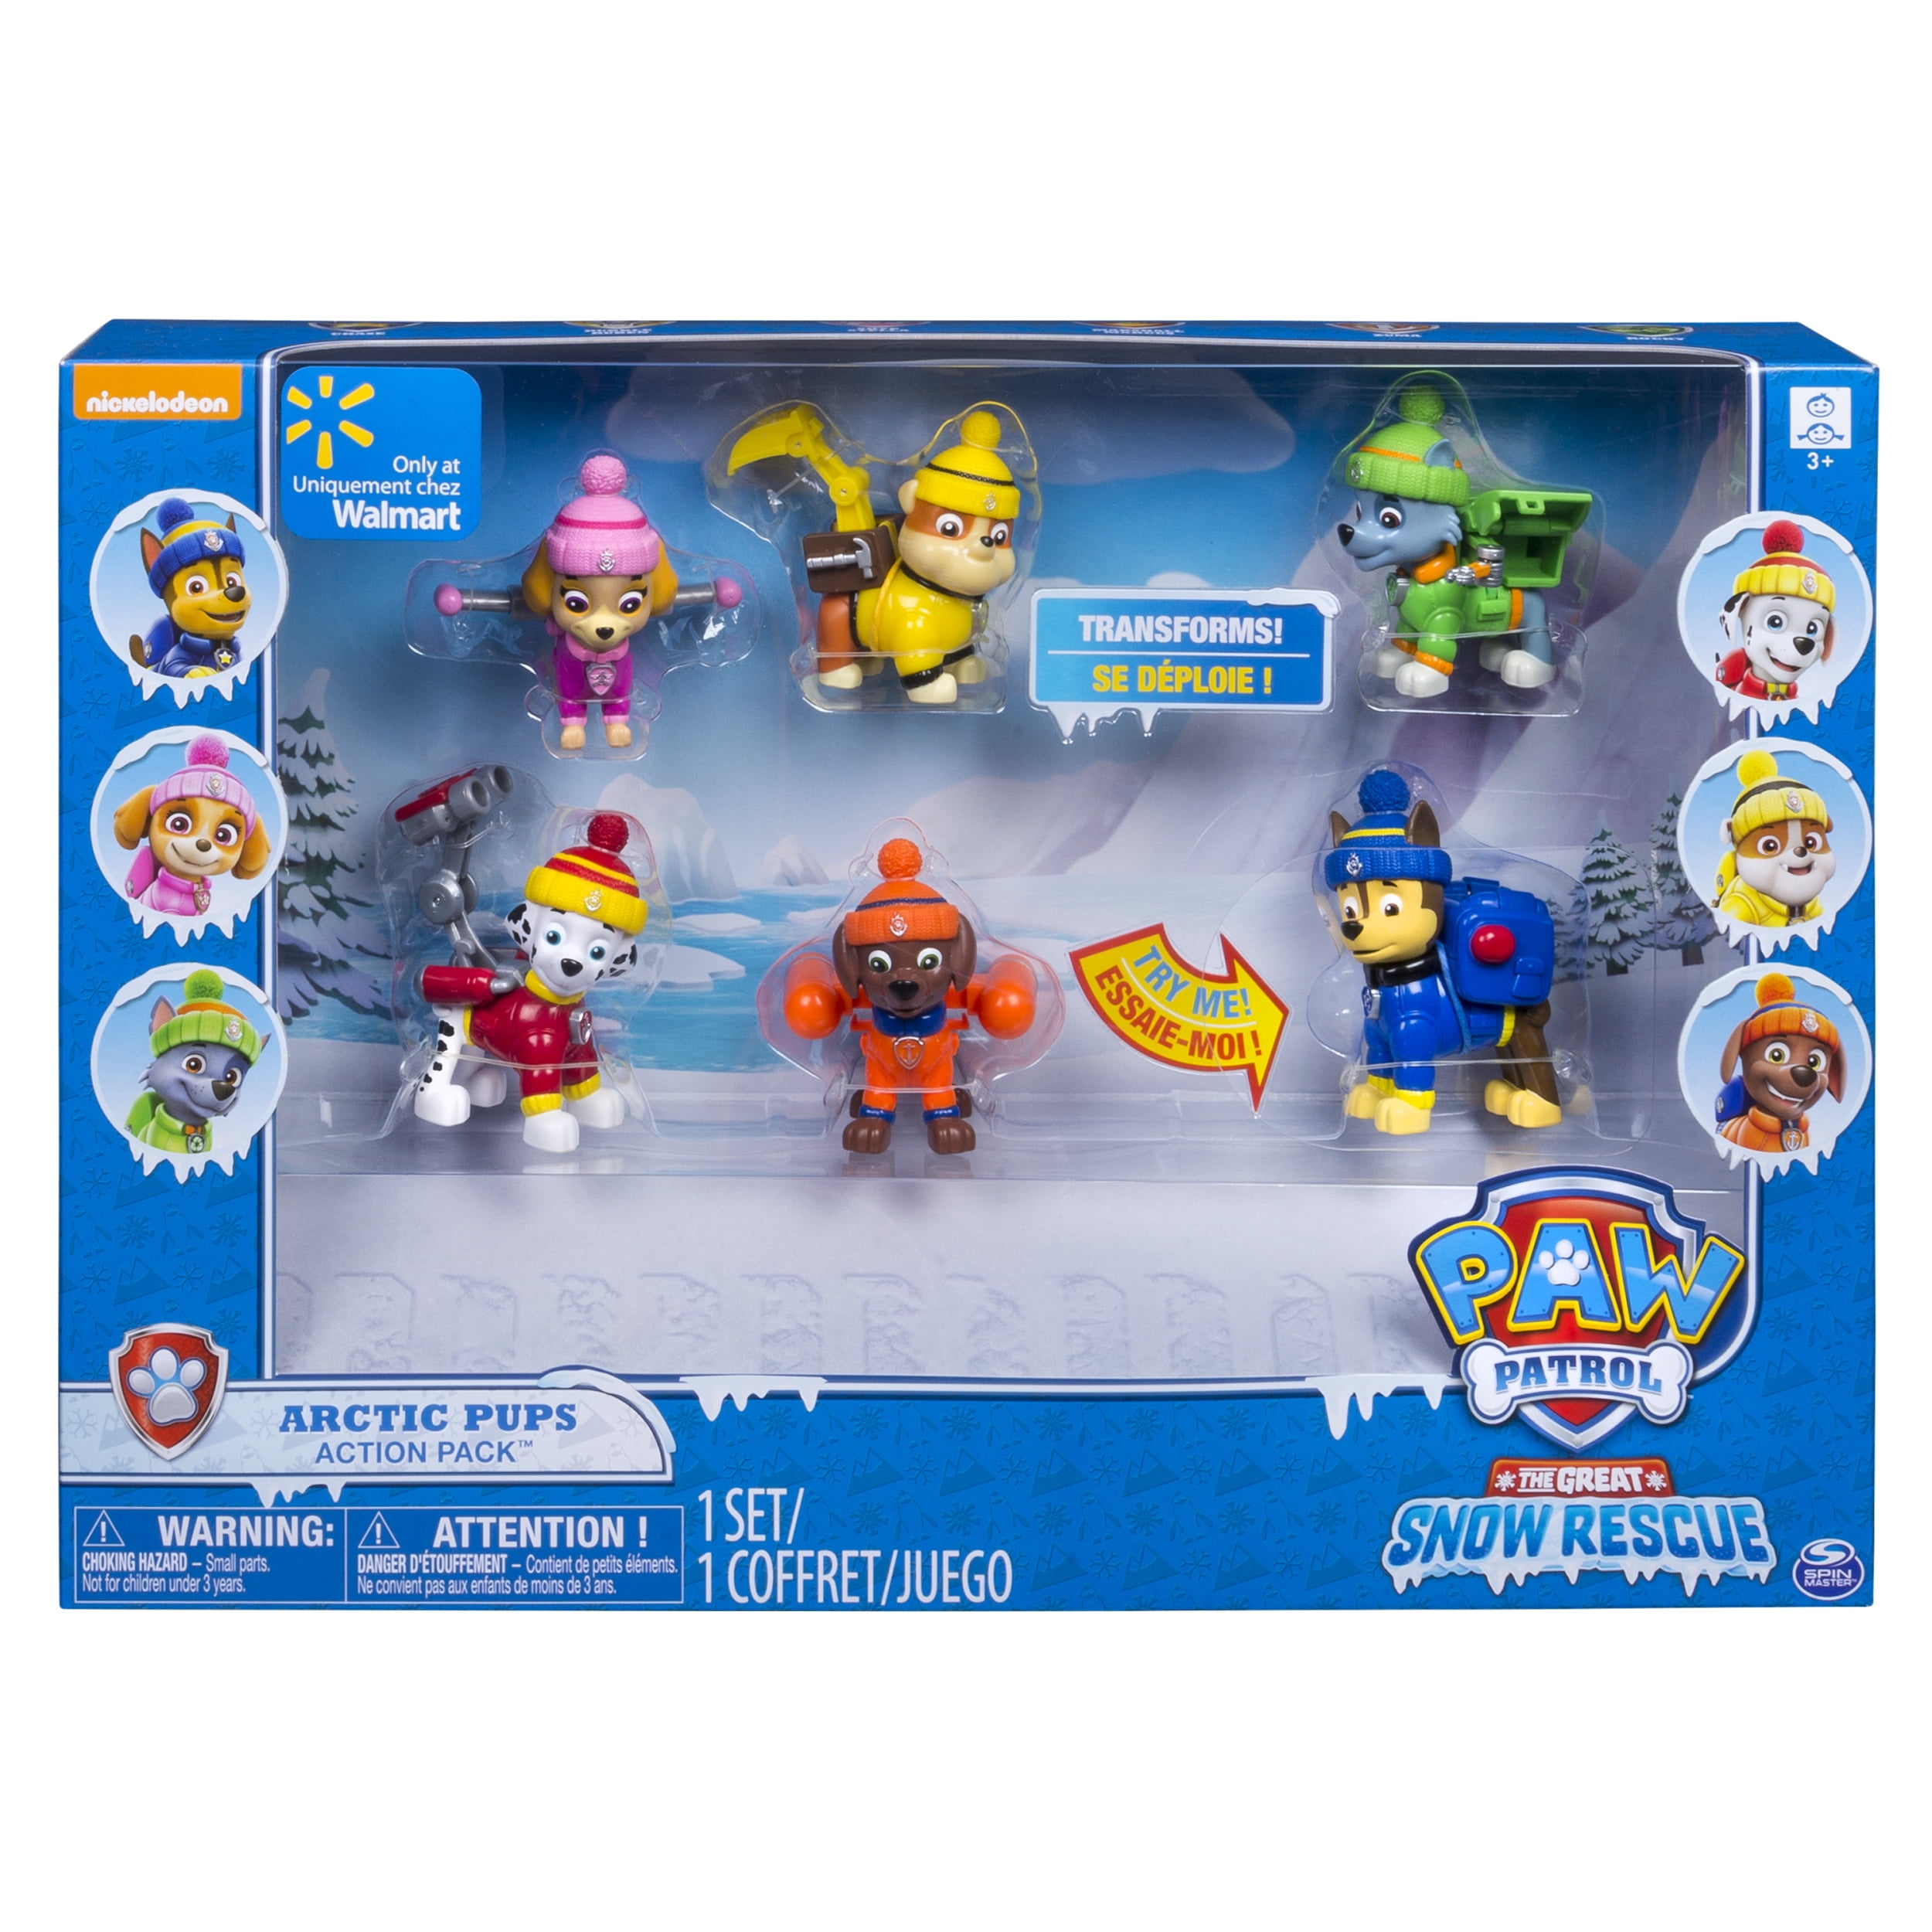 Paw Patrol Snow Rescue – Arctic Pups Action Pack Gift Set ... - 2500 x 2500 jpeg 1718kB